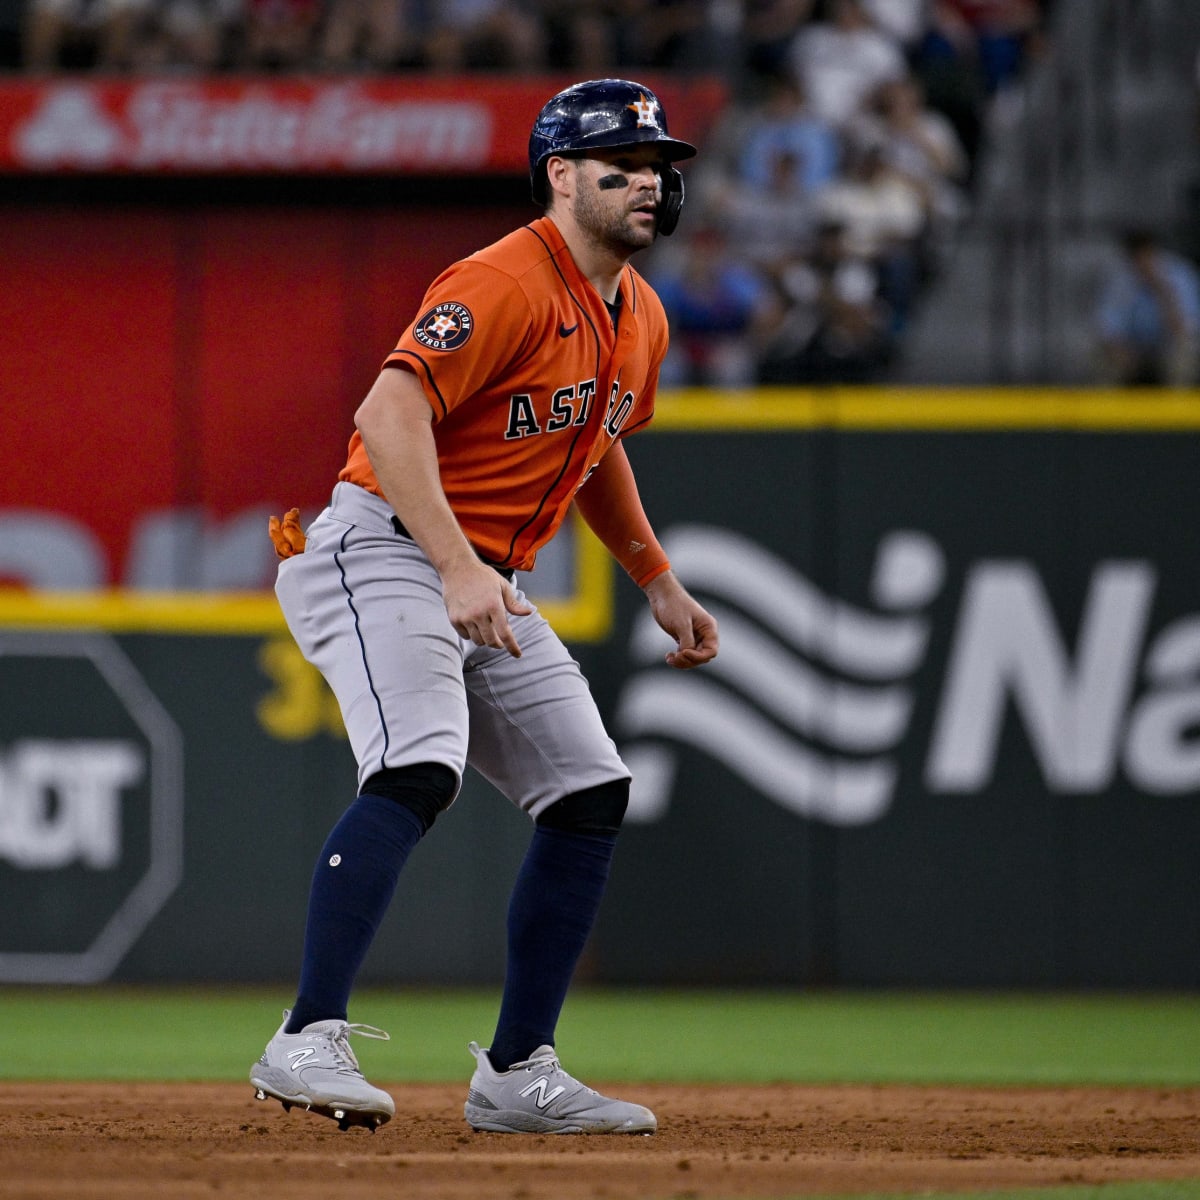 Real Chas: McCormick in CF for Astros, no twin switch here – KXAN